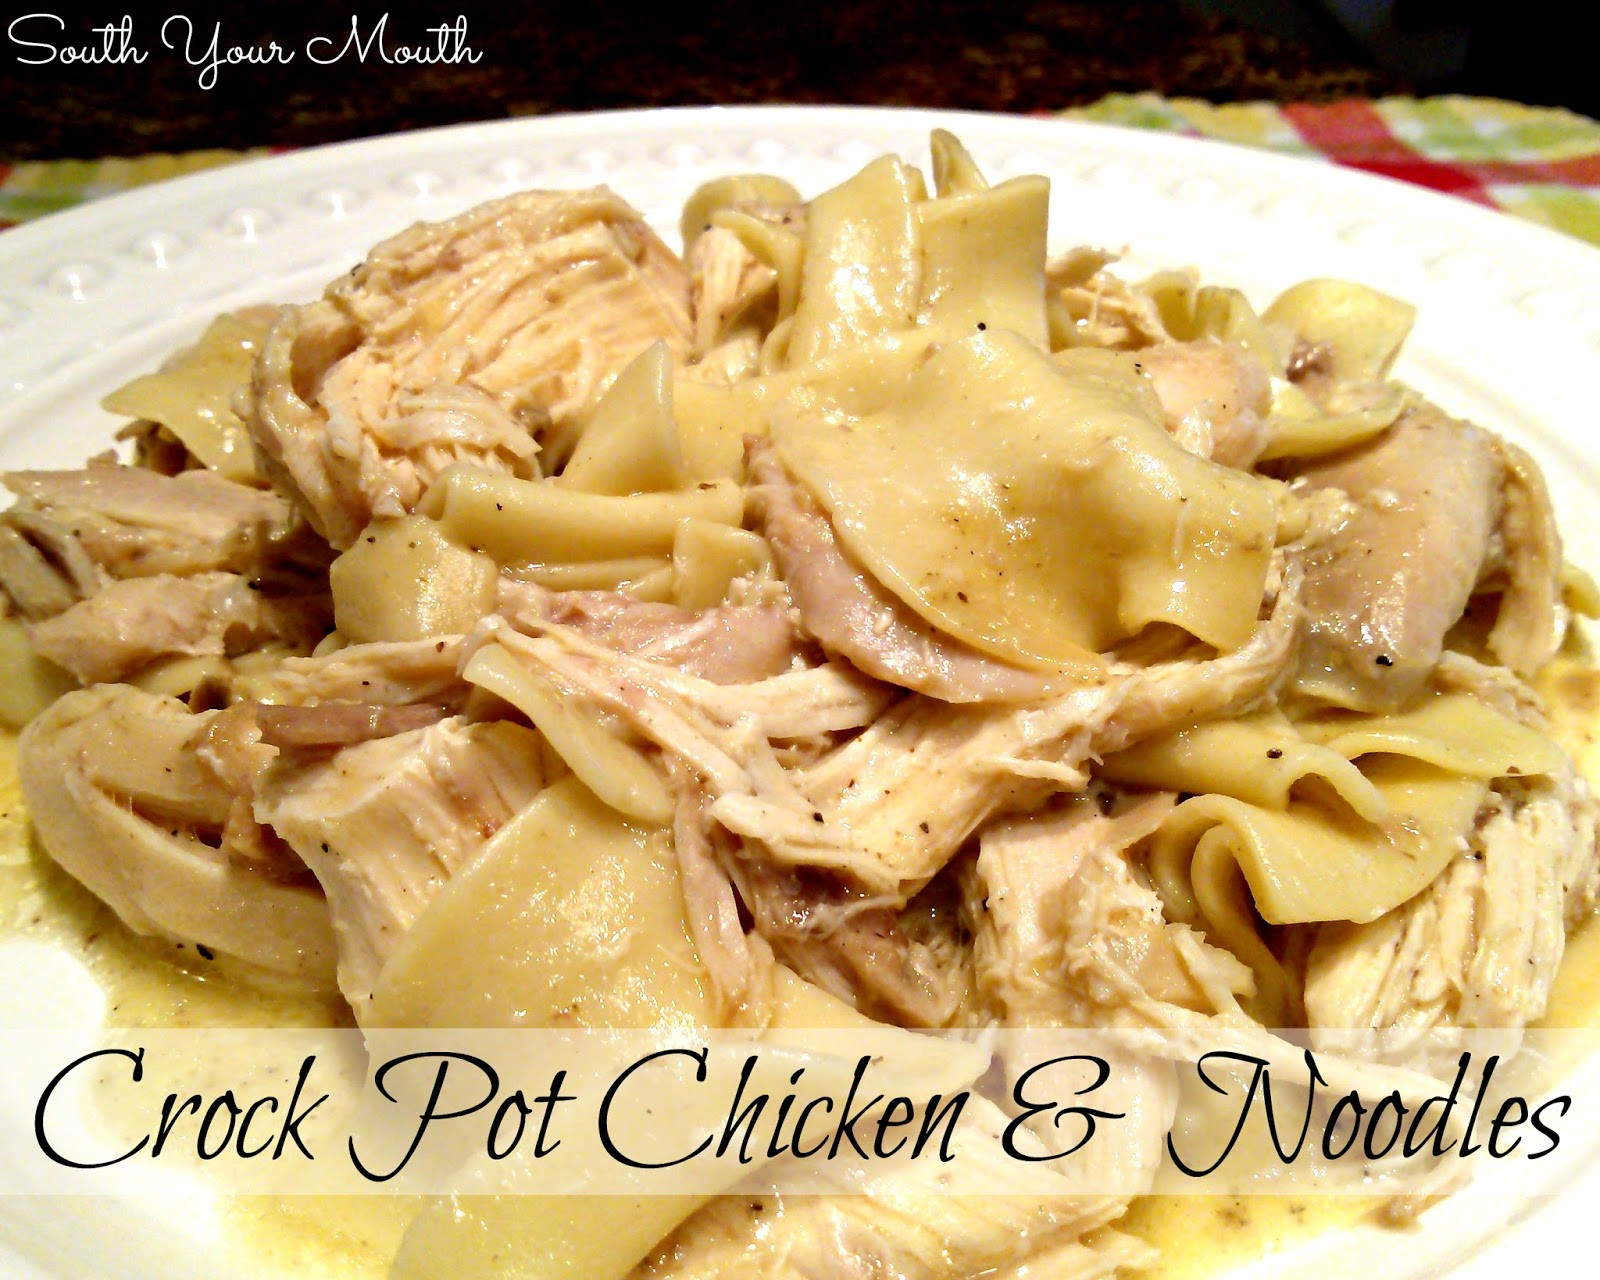 Recipes With Egg Noodles And Chicken
 South Your Mouth Crock Pot Chicken and Noodles